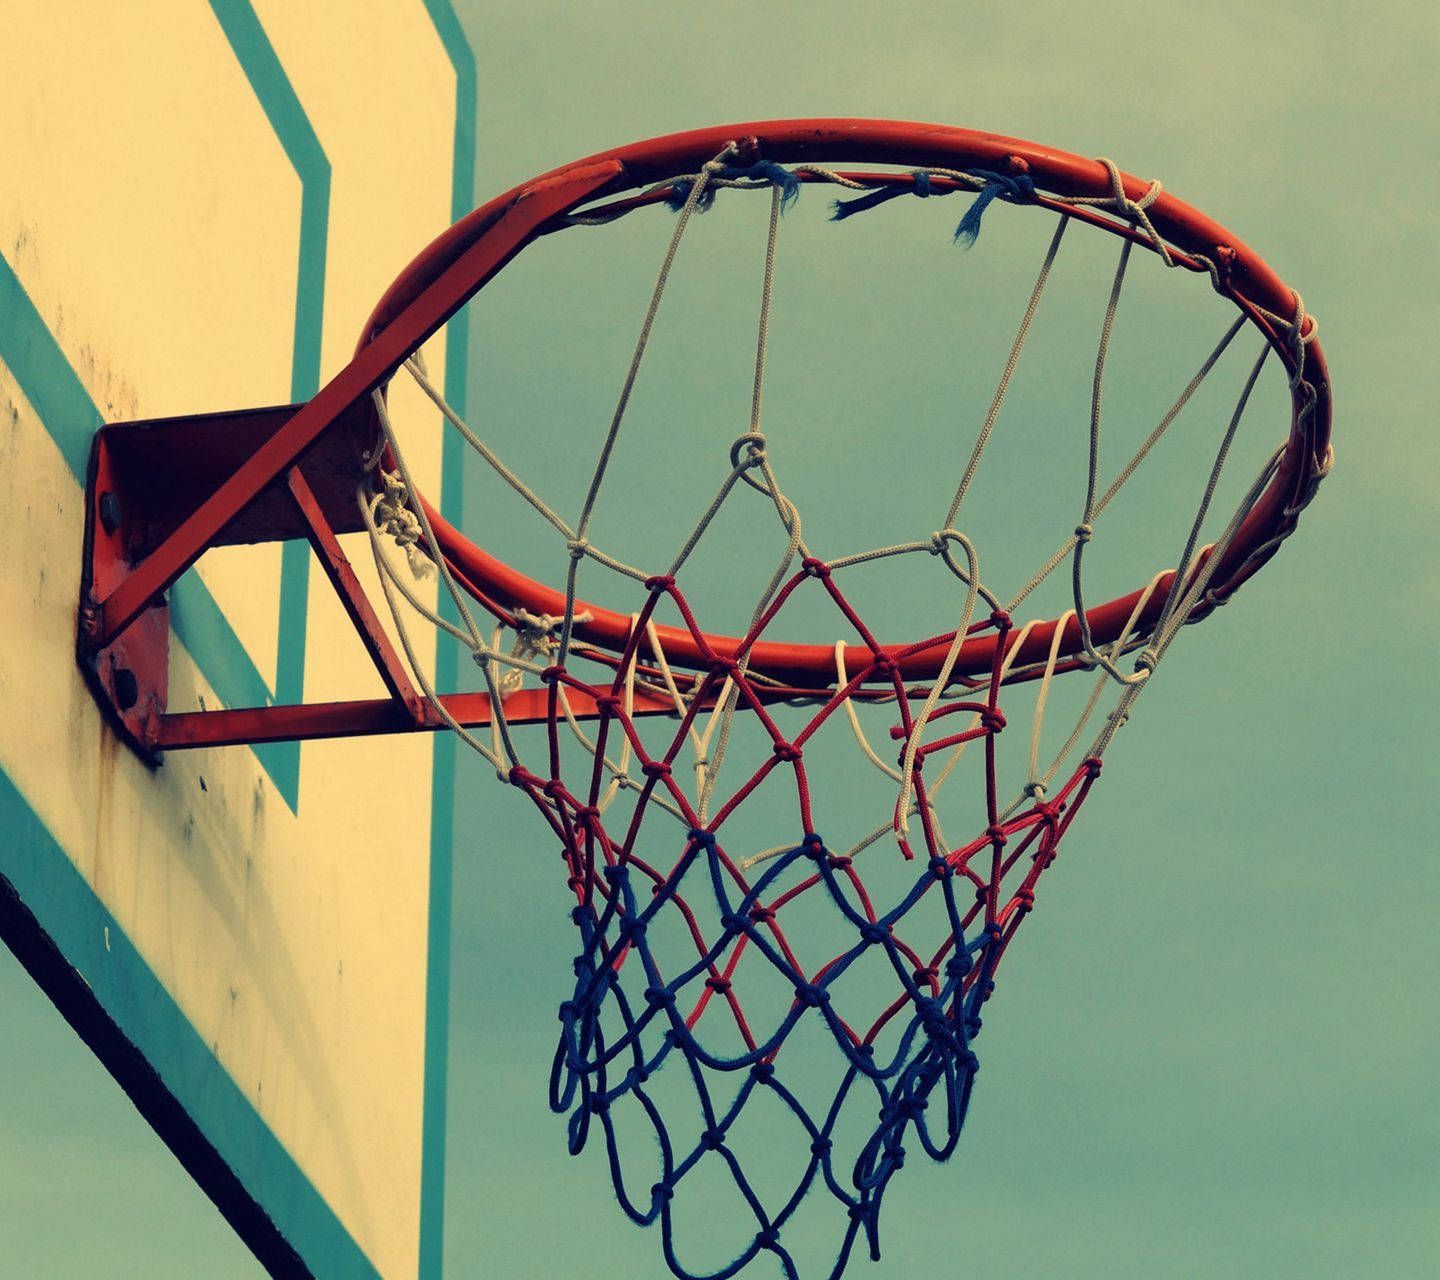 A basketball hoop with the net in it - Basketball